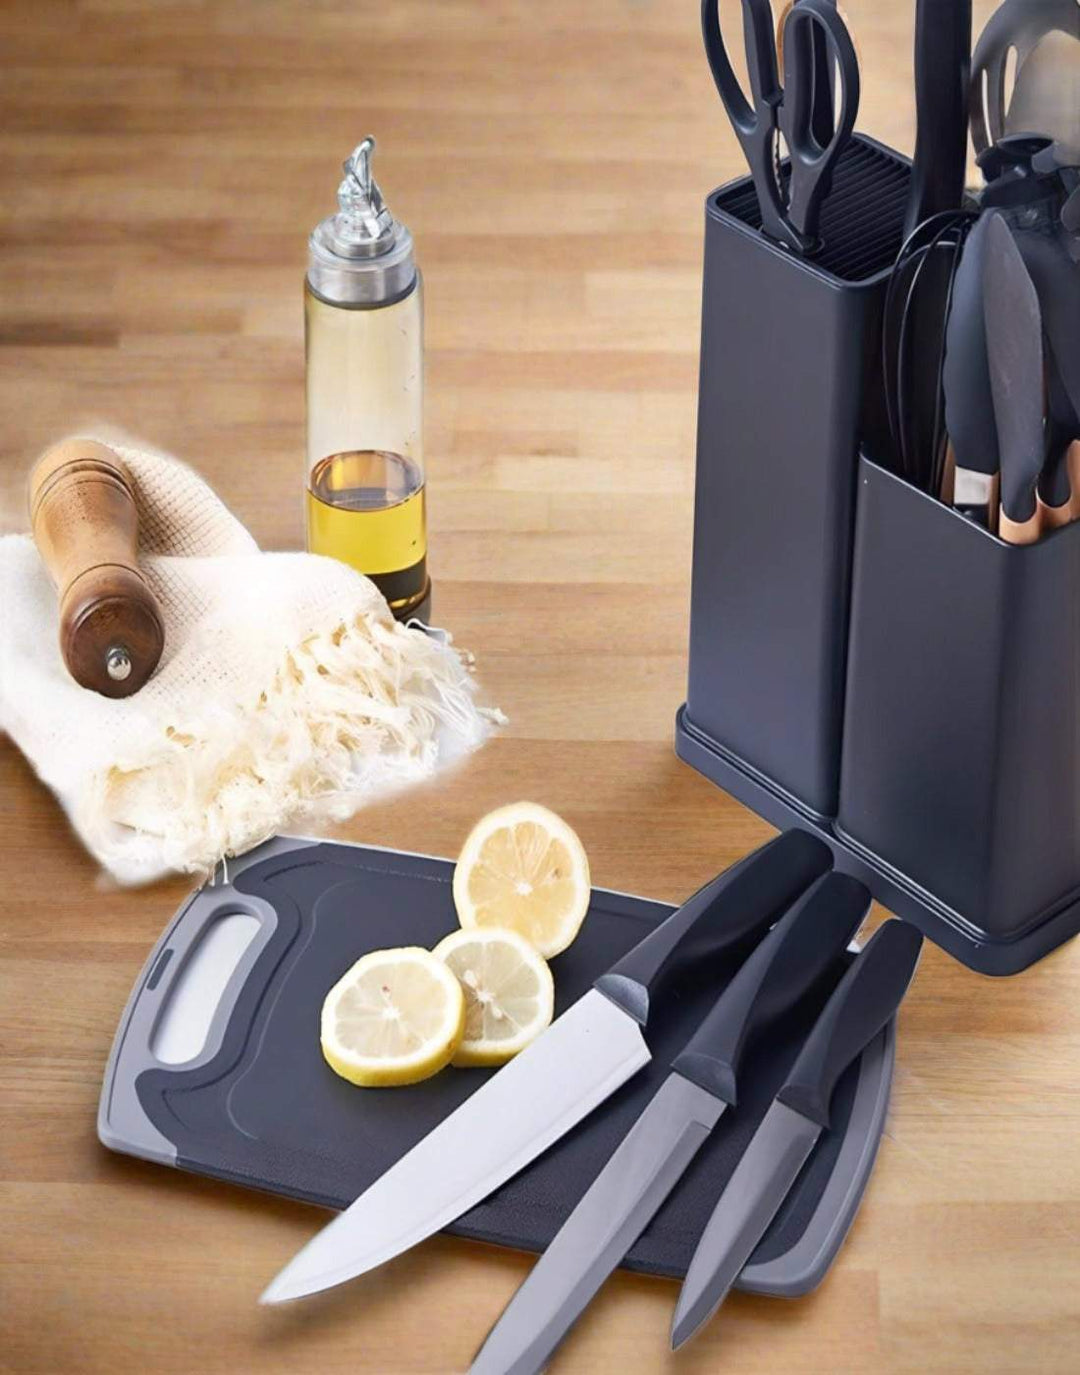 Kitchen Set: 19-Piece Utensils and Knife Set with Block, Includes 9-Piece Silicone Cooking Utensils, 5 Sharp Stainless Steel Chef Knives, Scissors, Whisk, Tongs, and Cutting Board (Black)